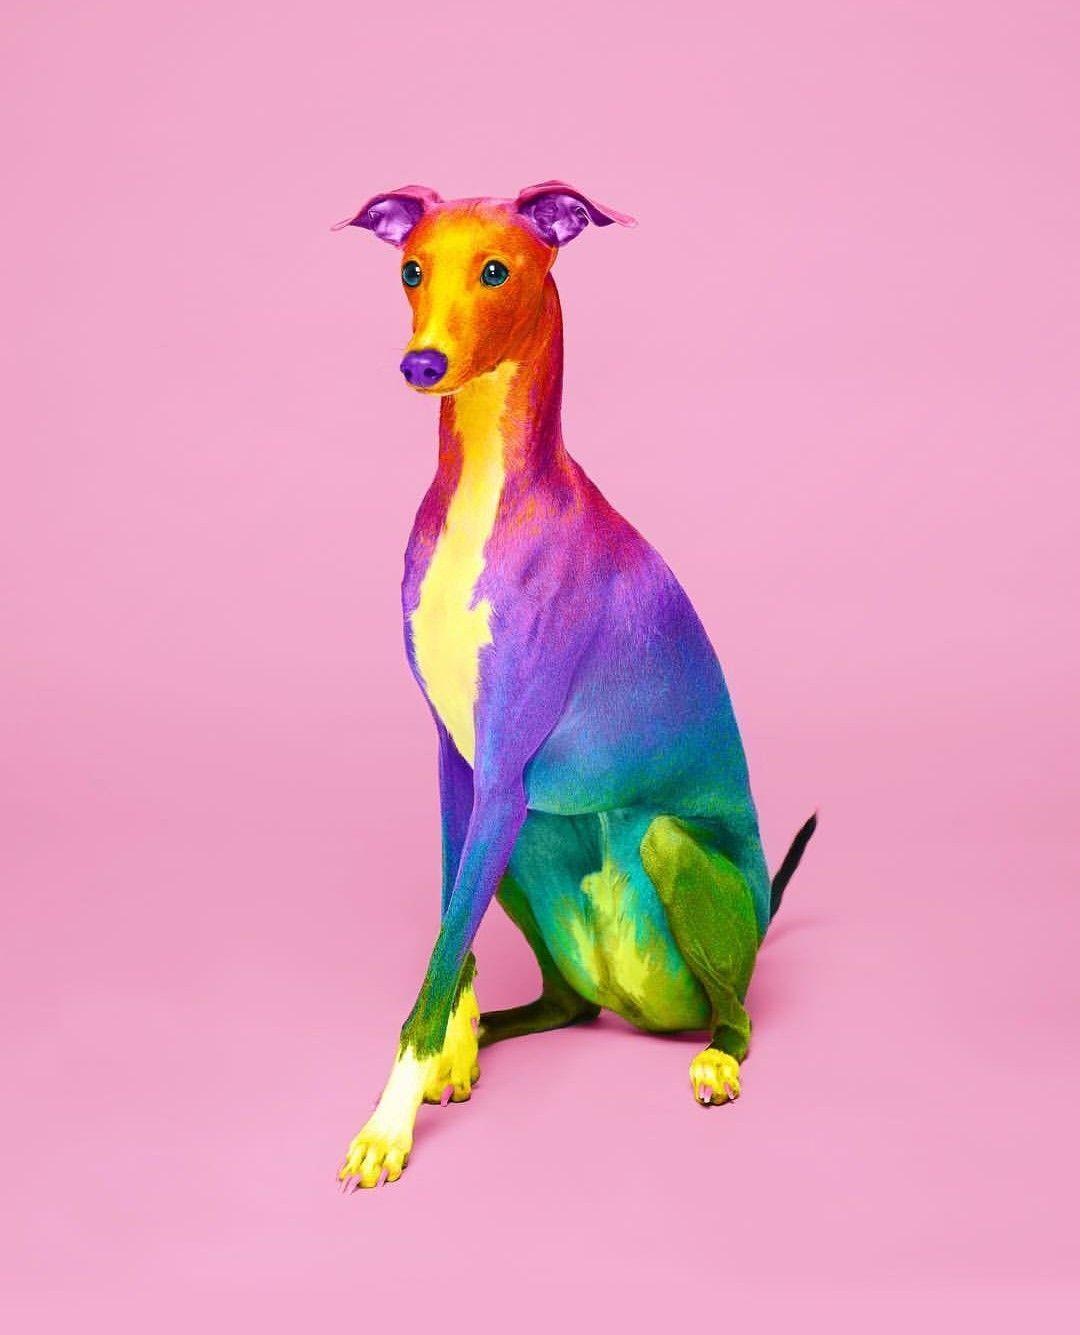 Rainbow Dog Wallpapers - Top Free Rainbow Dog Backgrounds - Wallpaperaccess